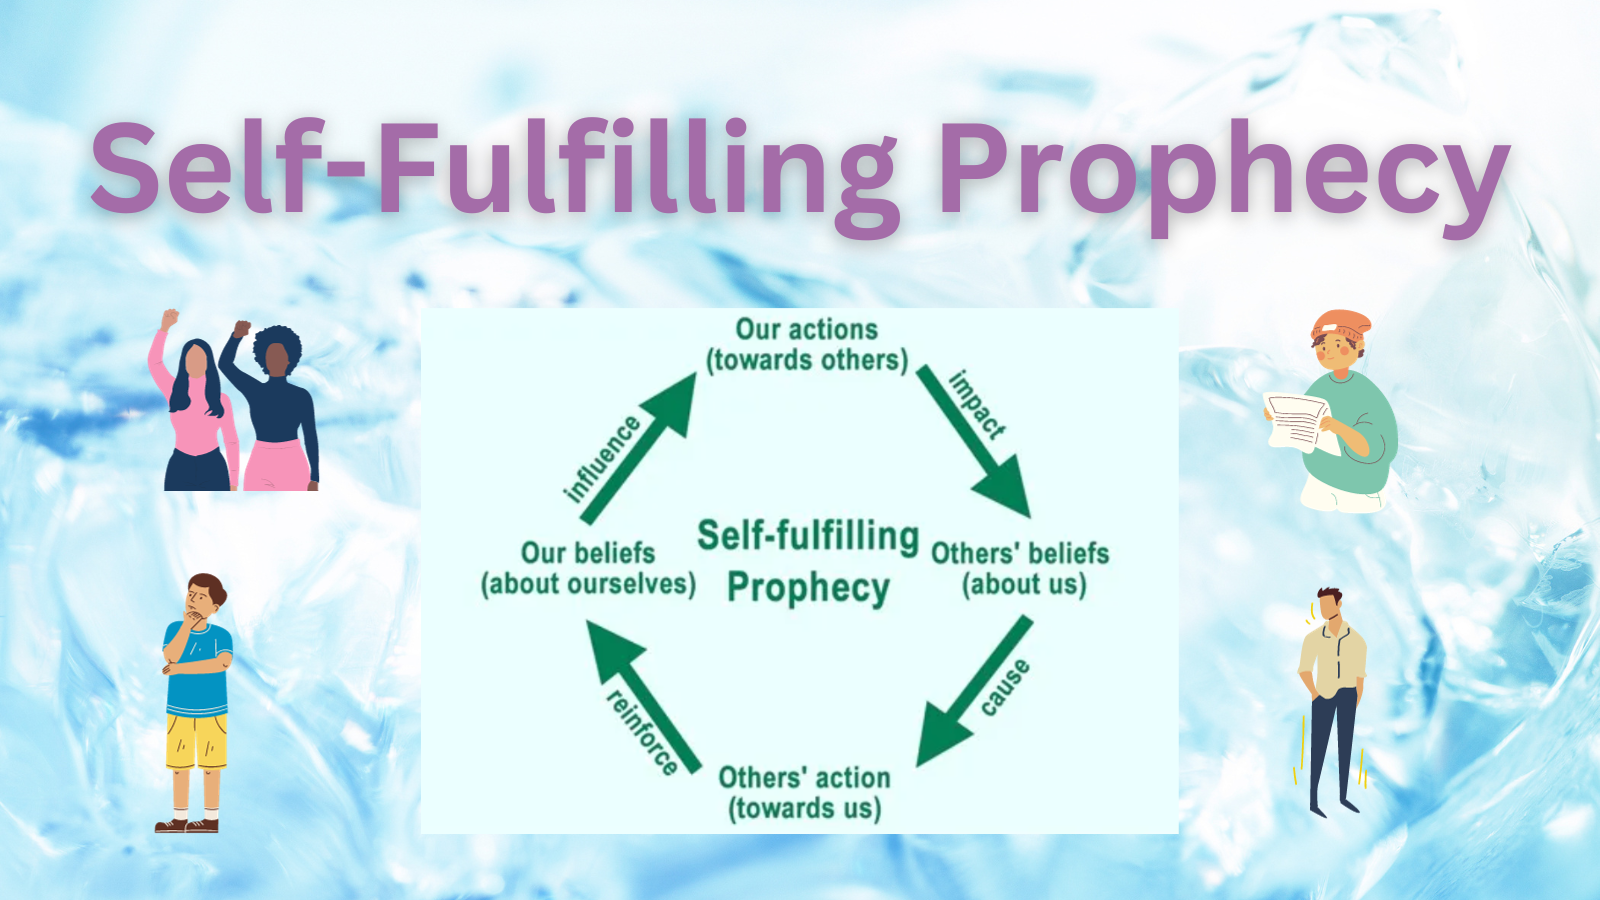 Power of the Self-Fulfilling Prophecy